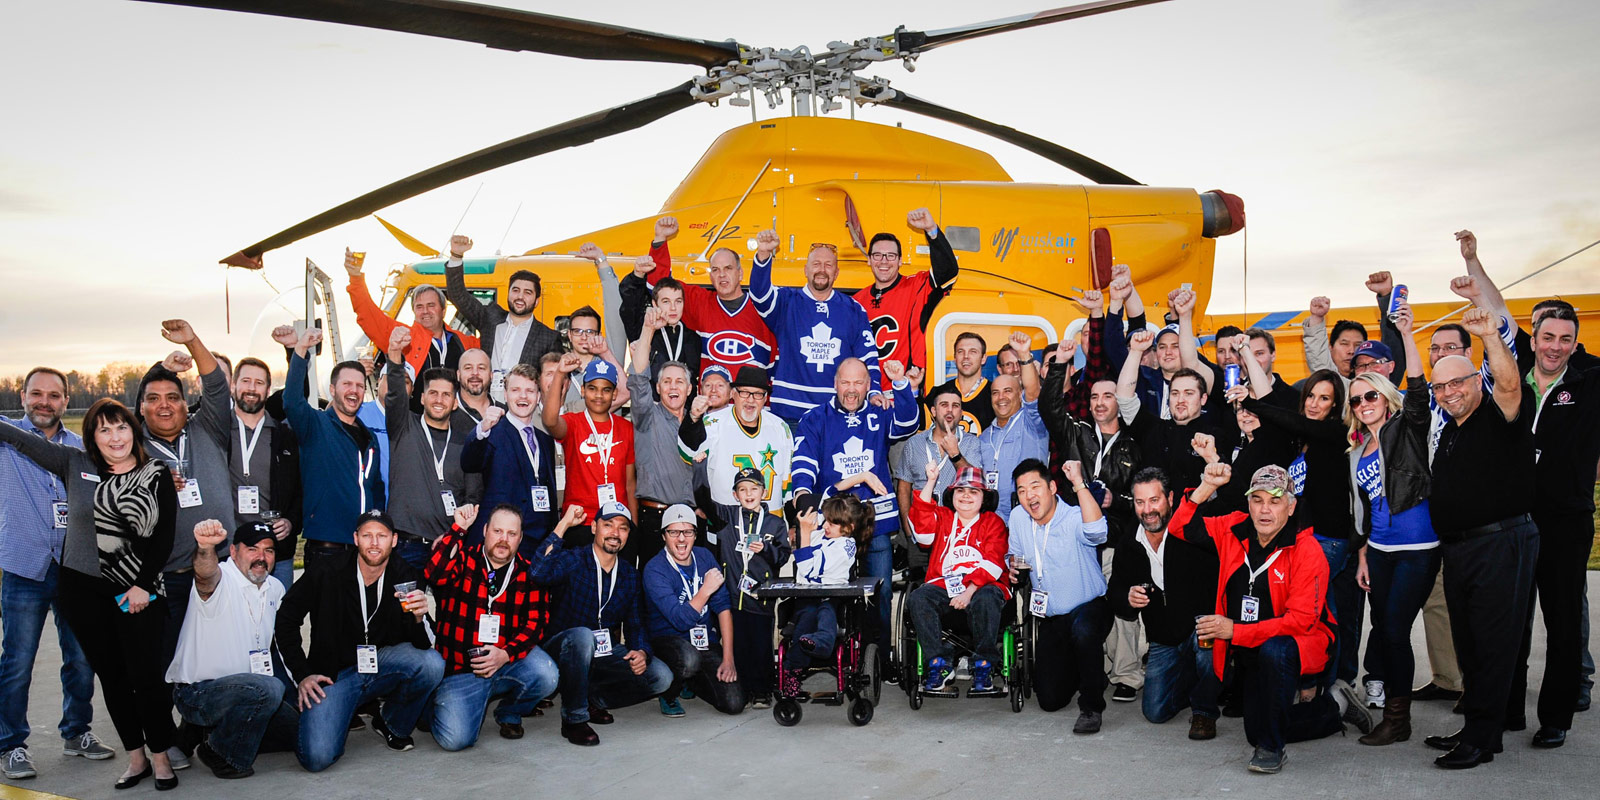 Everyone at the draft party poses infront of a yellow helicopter